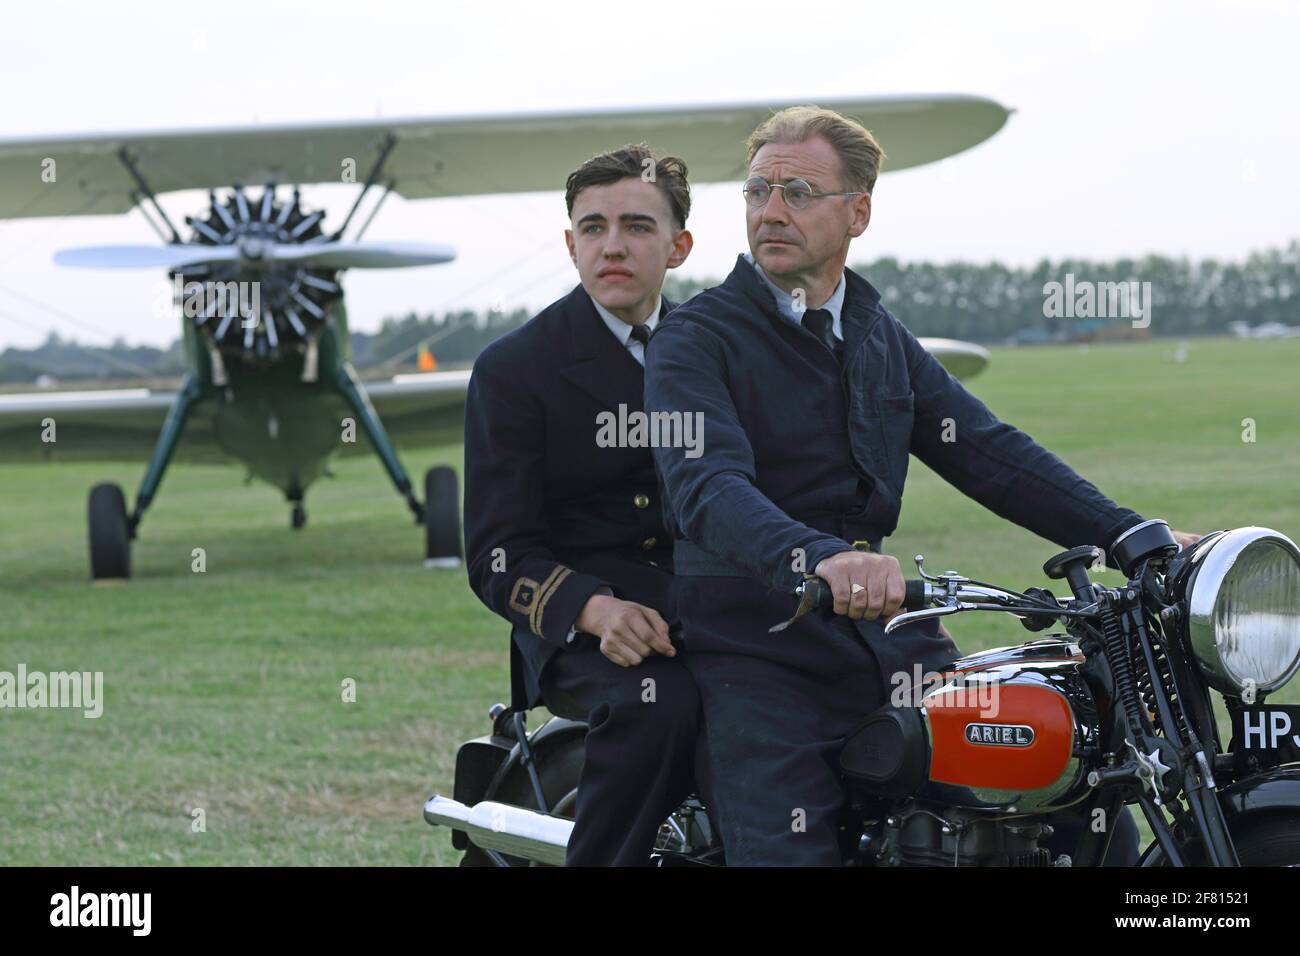 Goodwood revival, two man sitting on Ariel classic motorbike with vintage plane in the background , West Sussex, UK Stock Photo